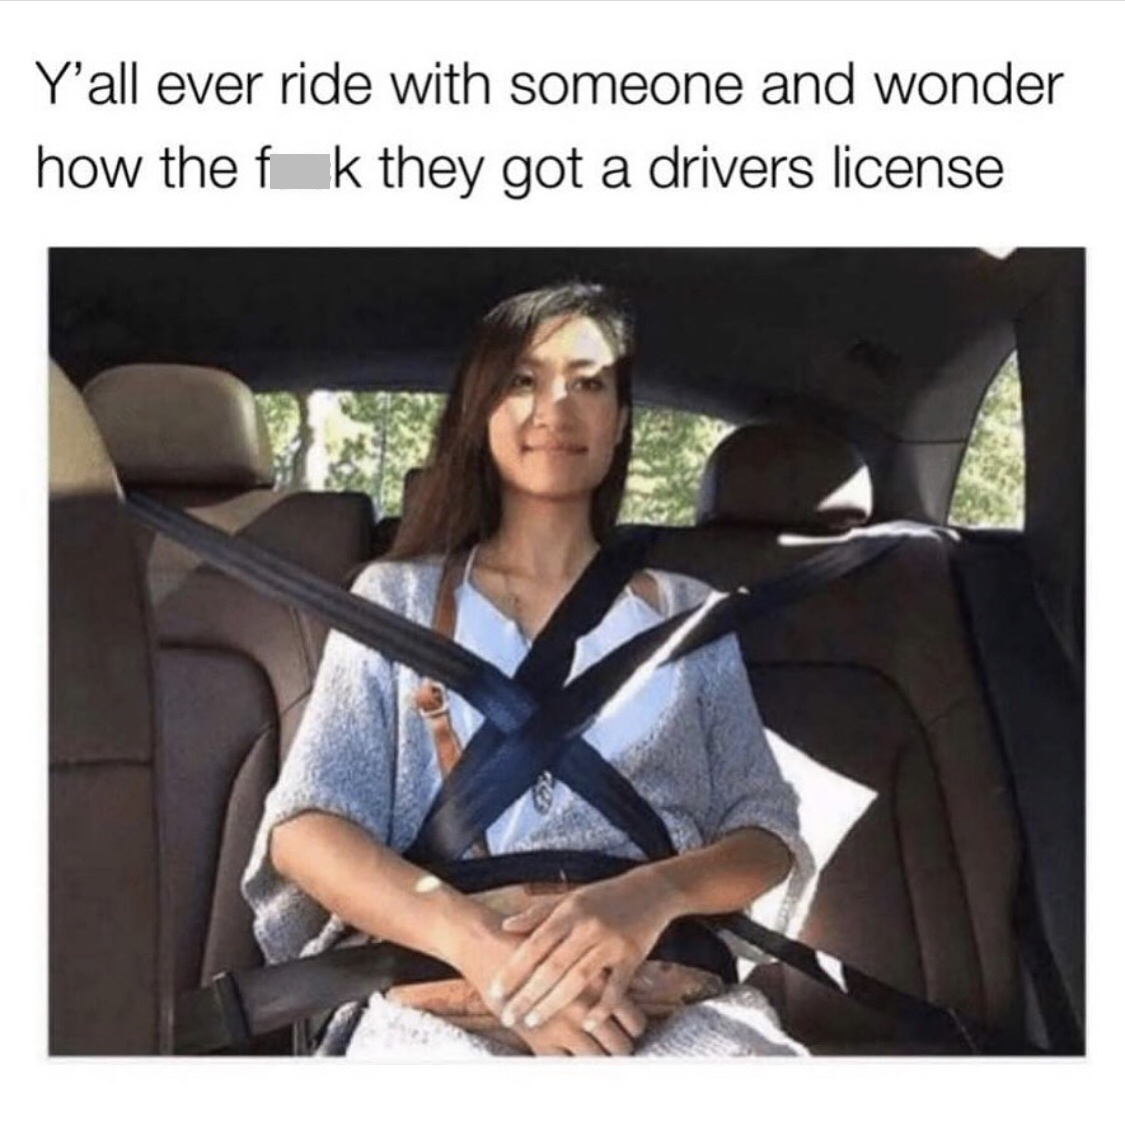 dank memes - bad driver meme - Y'all ever ride with someone and wonder how the f k they got a drivers license